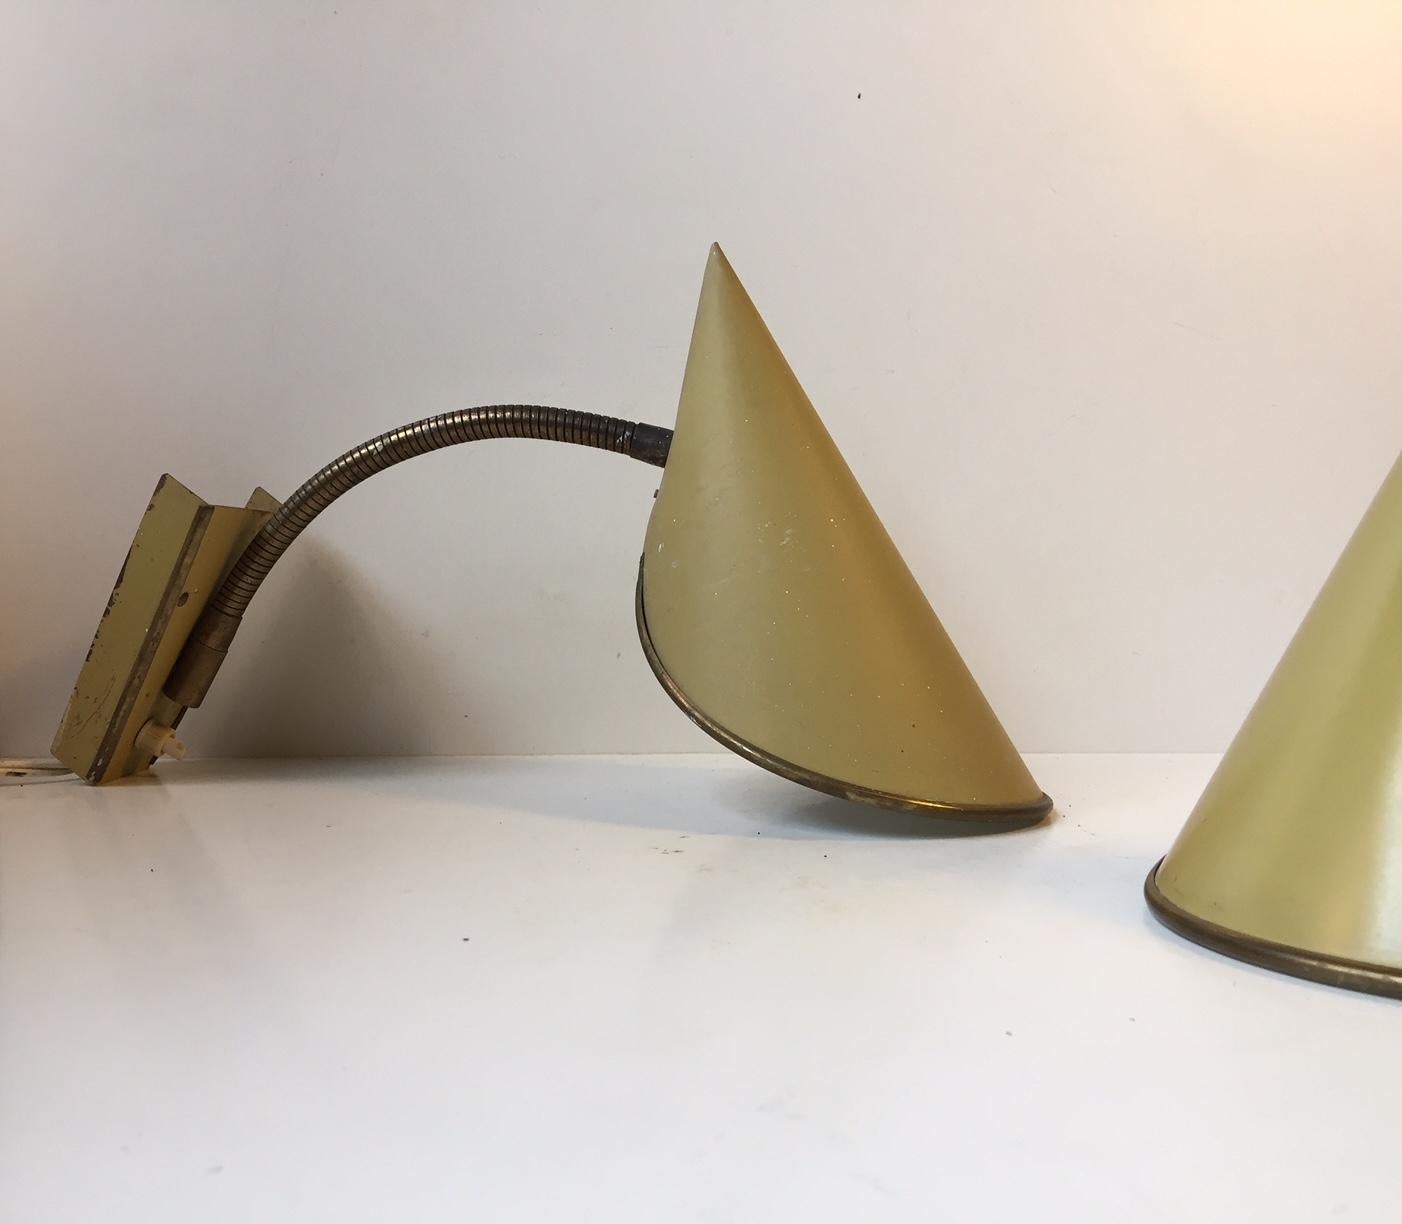 Painted Danish Modern Pointy Yellow Wall Lamps by Fog & Mørup, 1950s For Sale